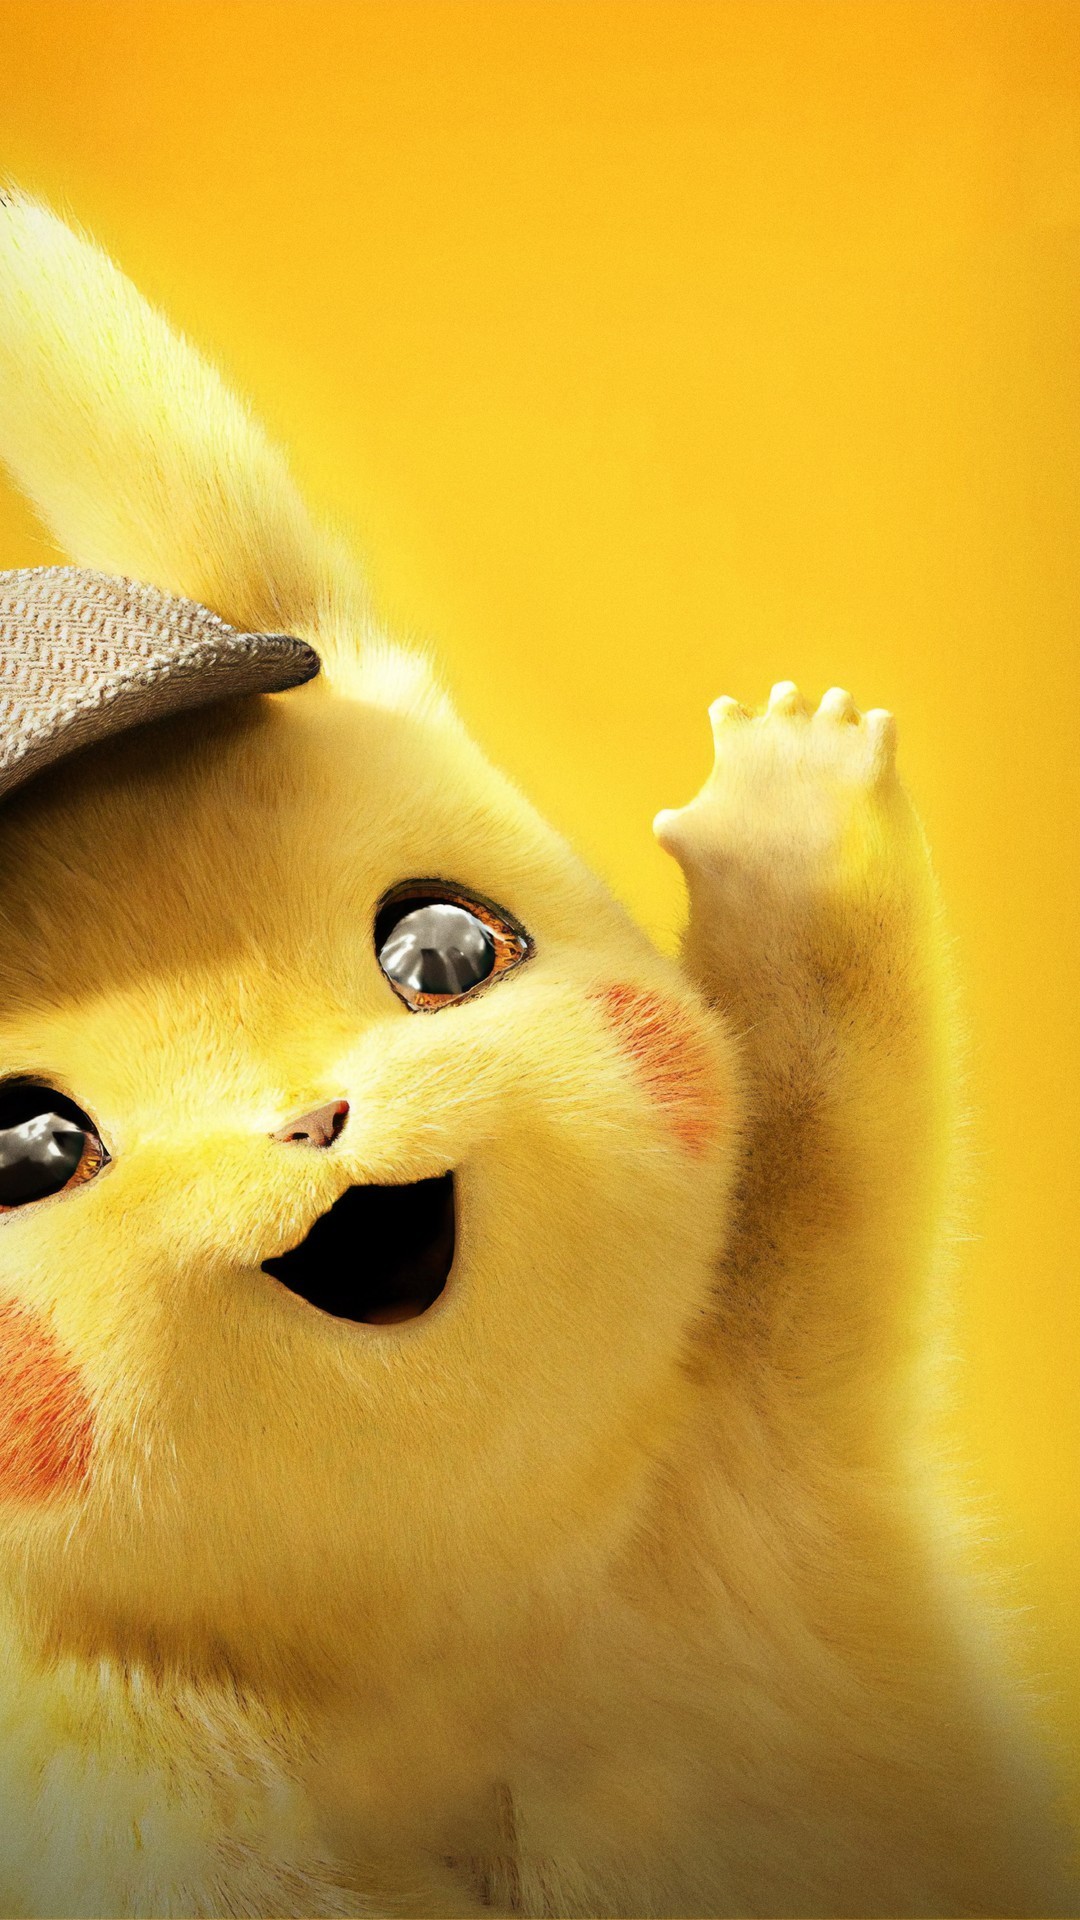 Pokémon Detective Pikachu Wallpaper for iPhone 7 with high-resolution 1080x1920 pixel. You can use this wallpaper for your Windows and Mac OS computers as well as your Android and iPhone smartphones